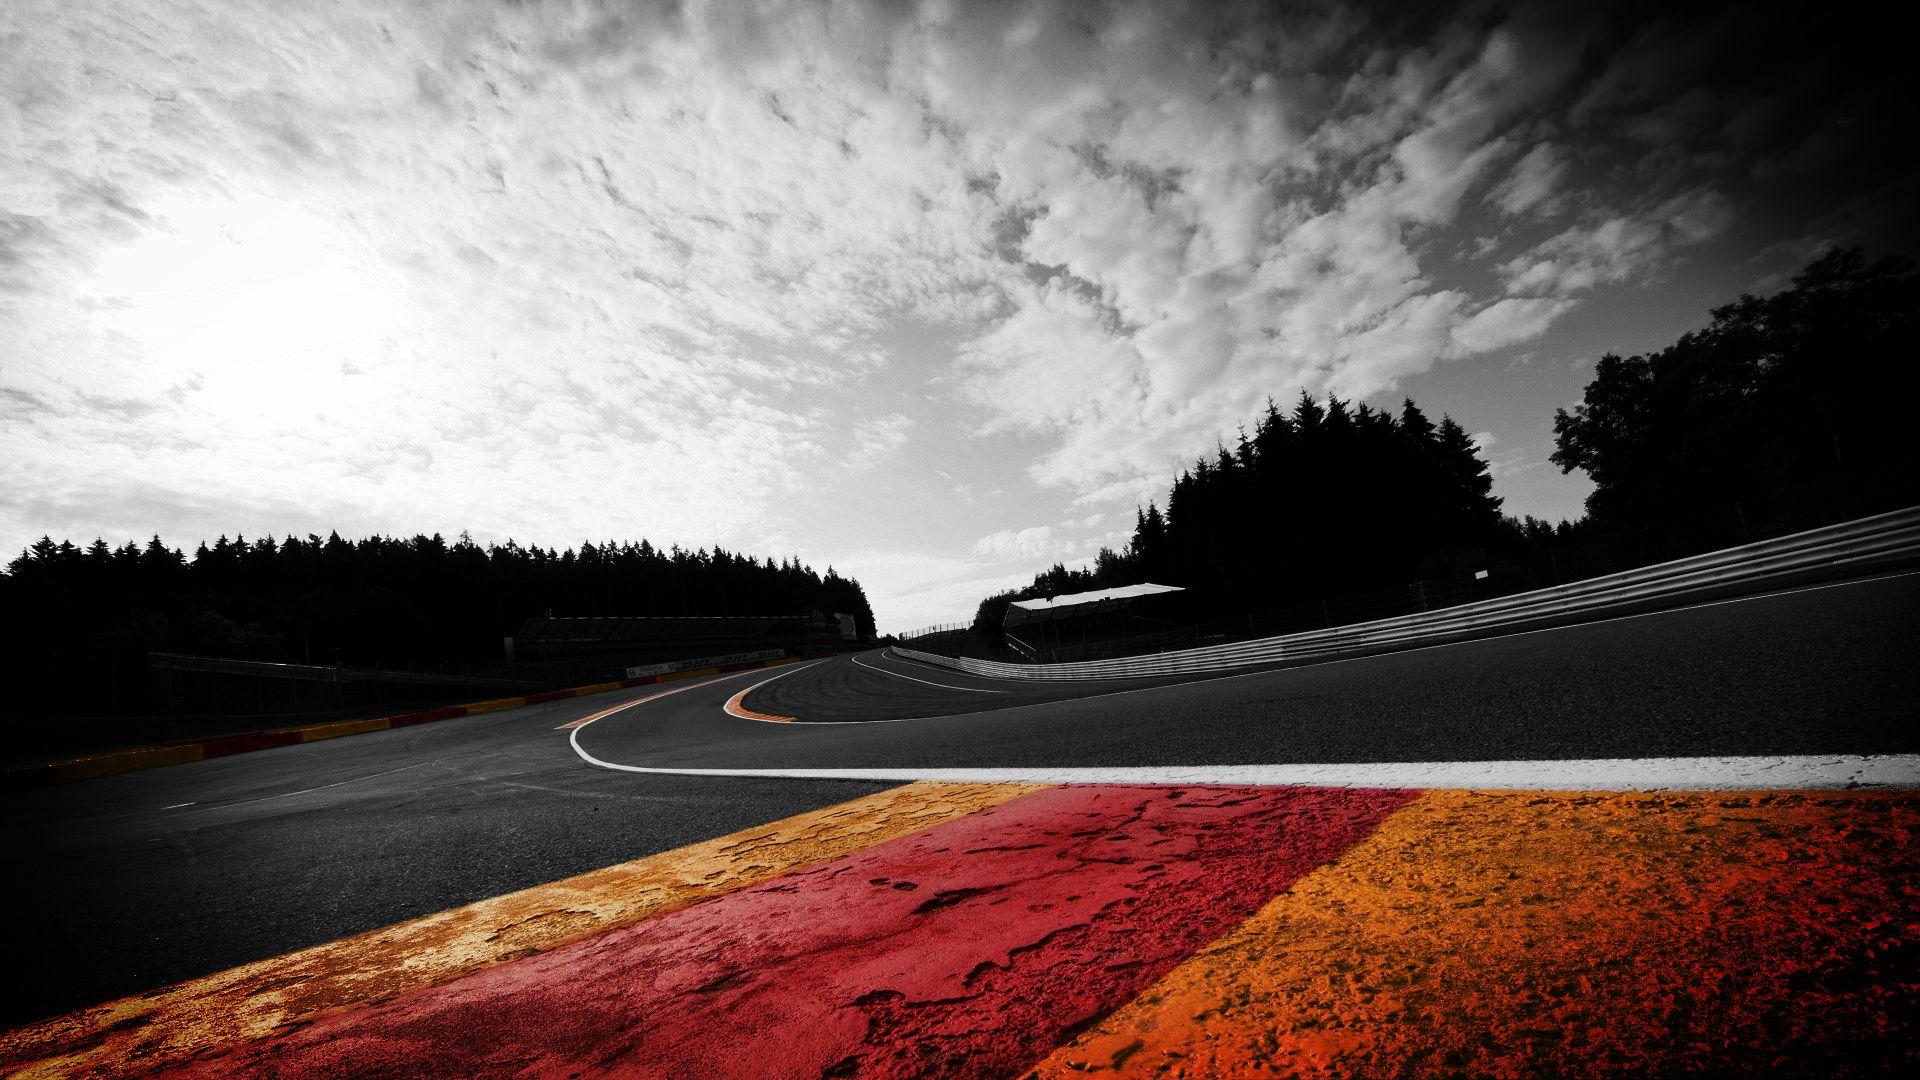 OT Does anyone have an good Eau Rouge wallpaper?